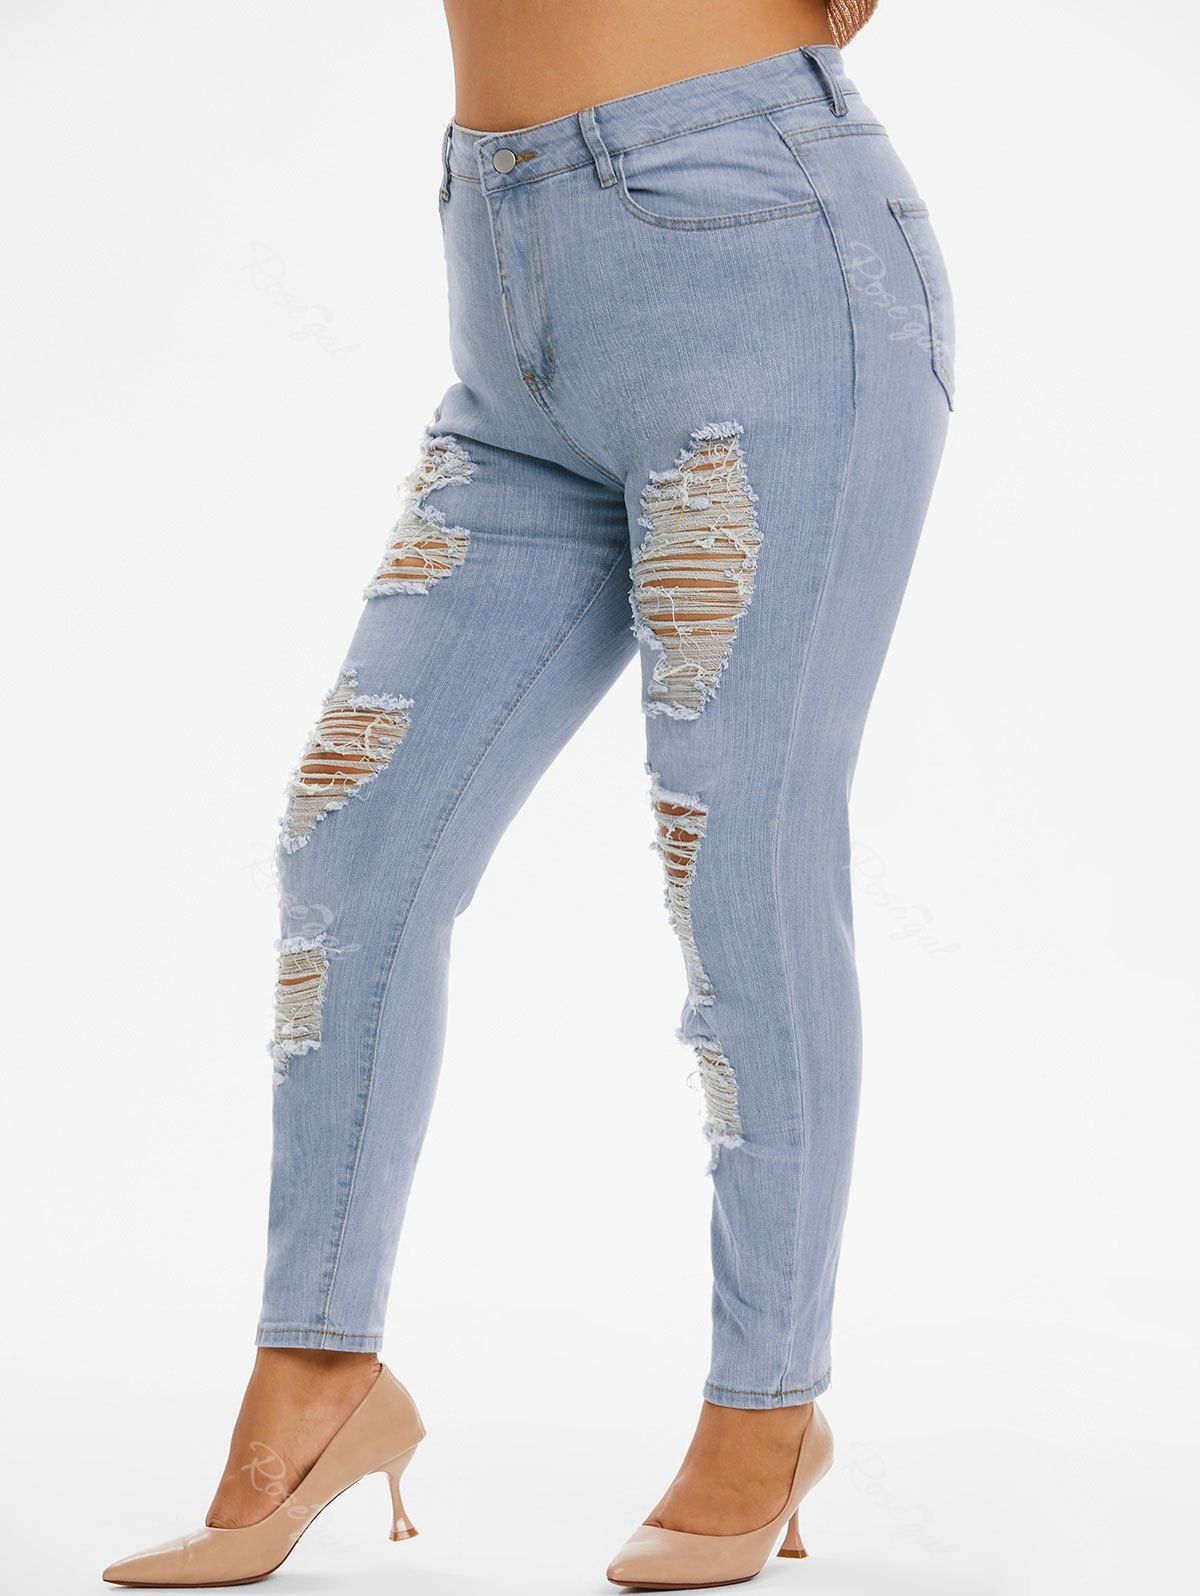 Trendy Plus Size & Curve Ripped Distressed Light Wash Jeans  